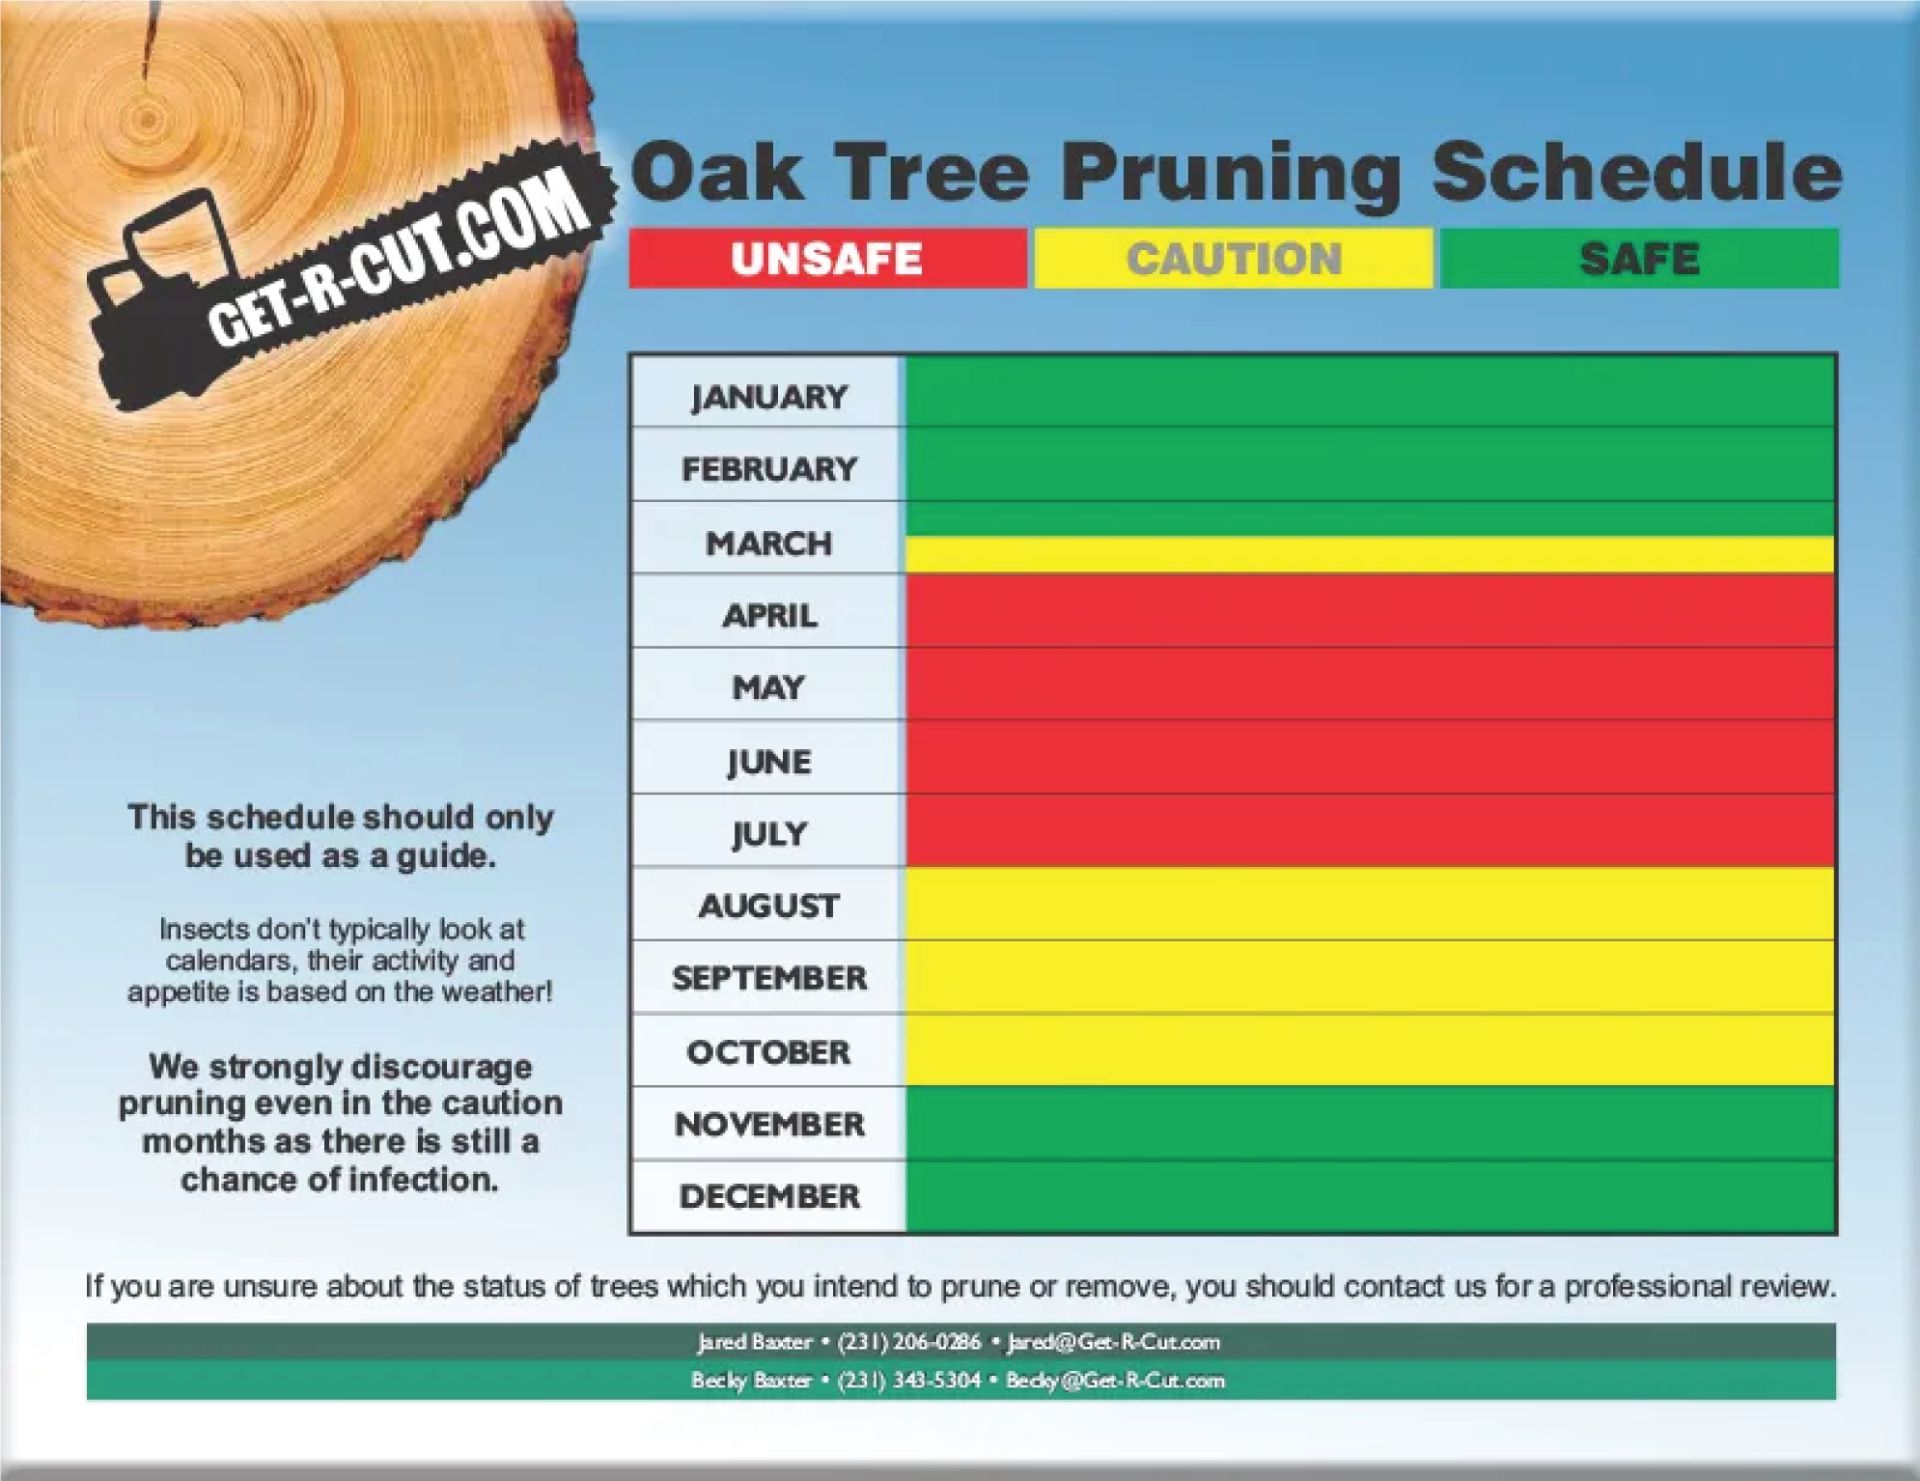 Expert Tree Pruning Services in West Michigan